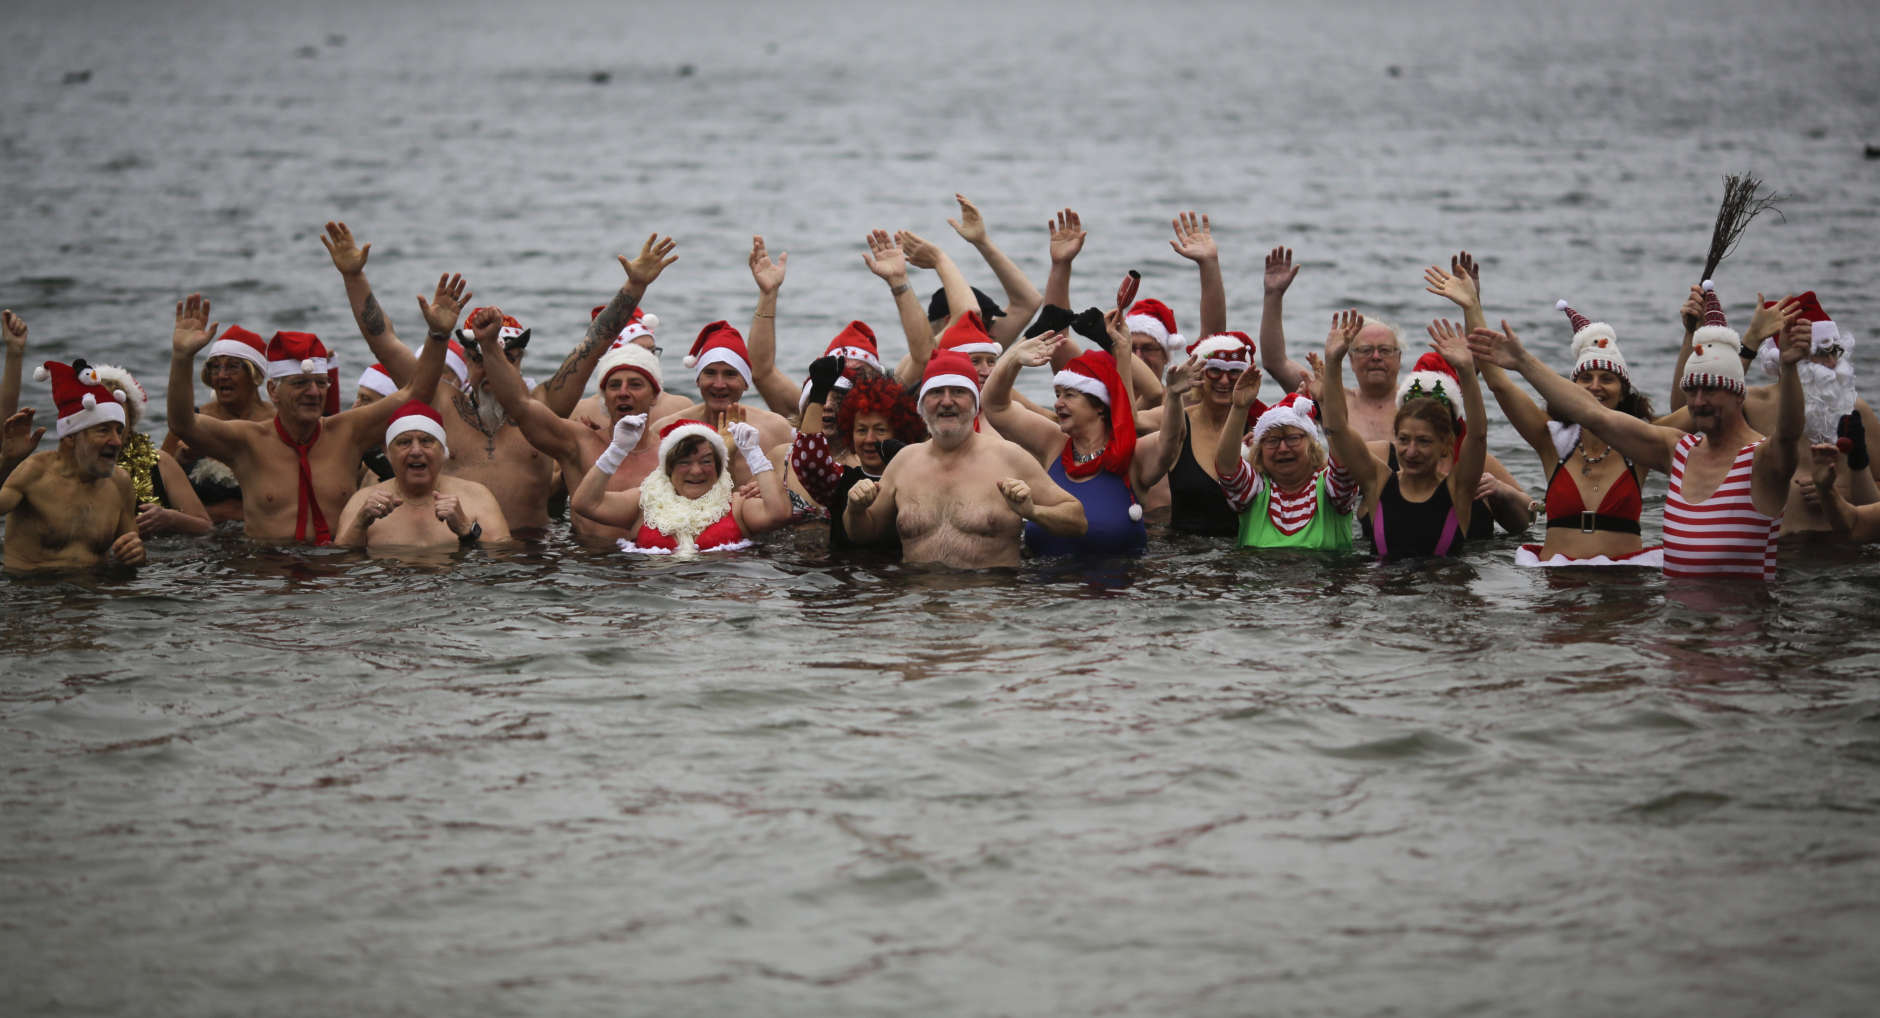 Members of the winter and ice swimming club 'Seehunde Berlin', (Berlin Seals), wearing Christmas themed hats, celebrate during the annual Christmas swim on Christmas Day, at the Oranke Lake in Berlin, Monday, Dec. 25, 2017. (AP Photo/Markus Schreiber)